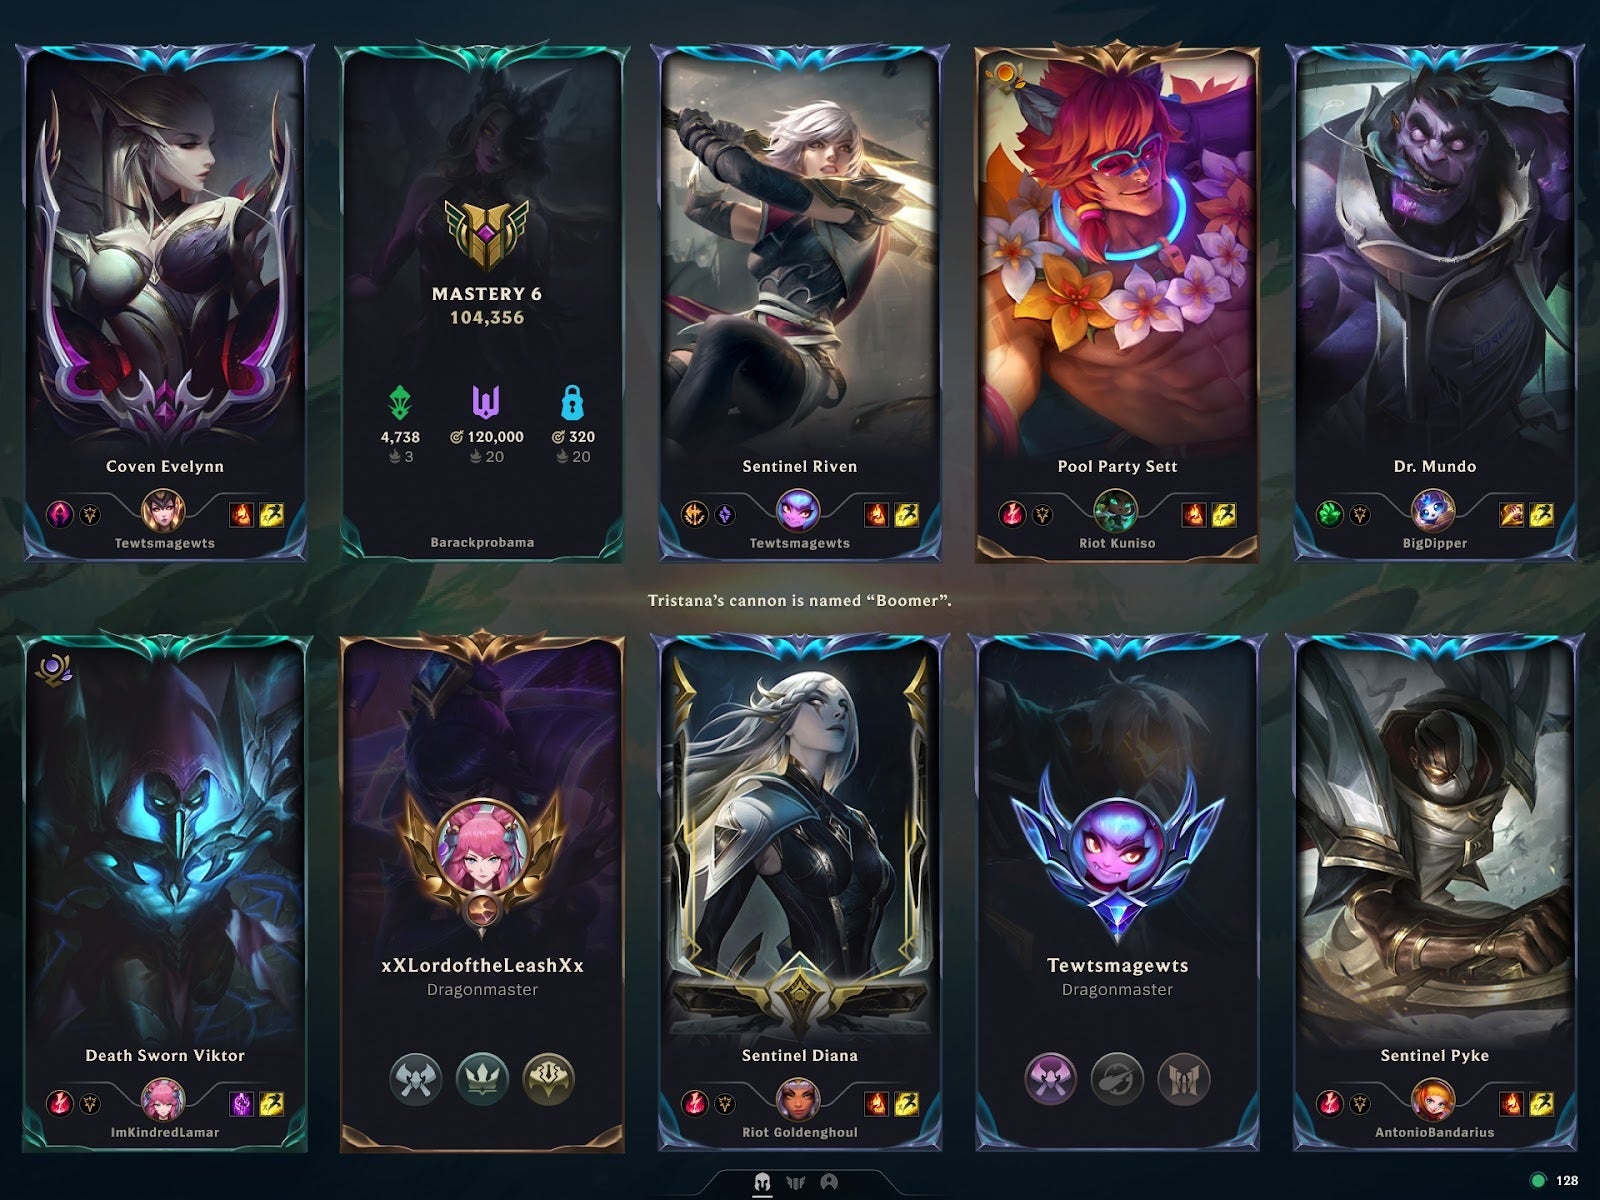 The new loading screen in League of Legends with Challenges included.